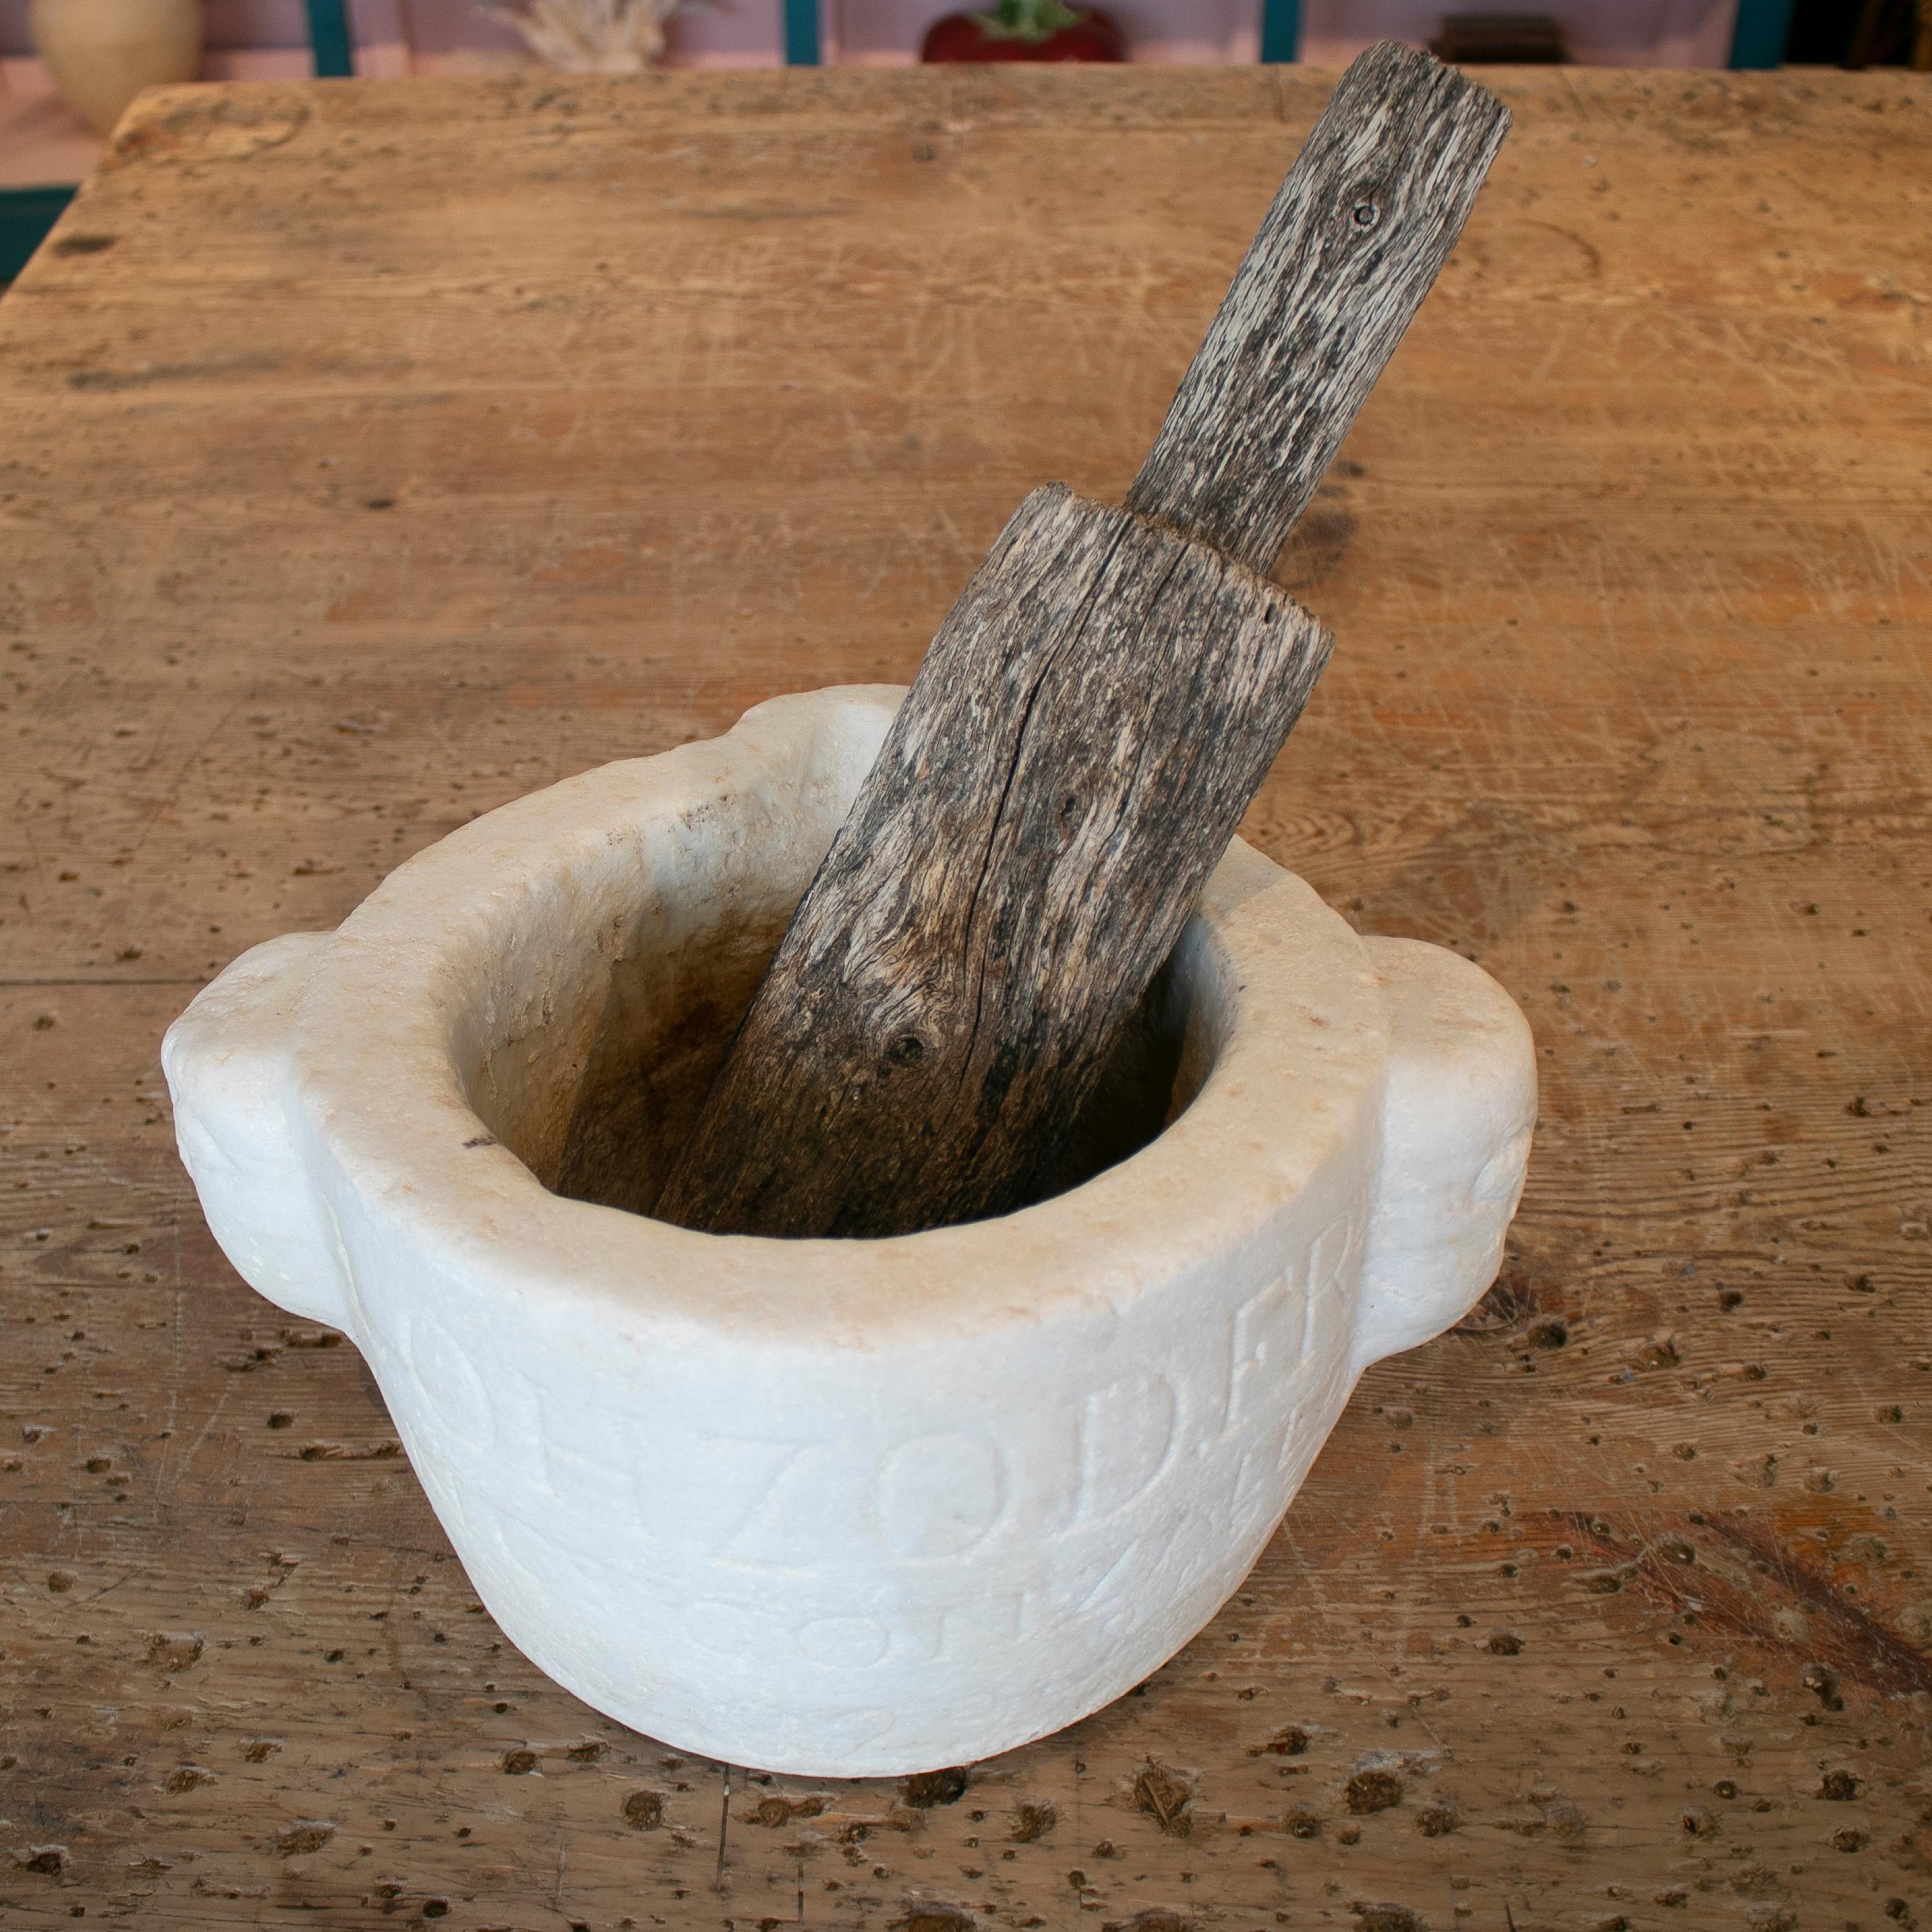 Antique 19th century Spanish hand carved inscribed marble stone mortar with wooden pestle.